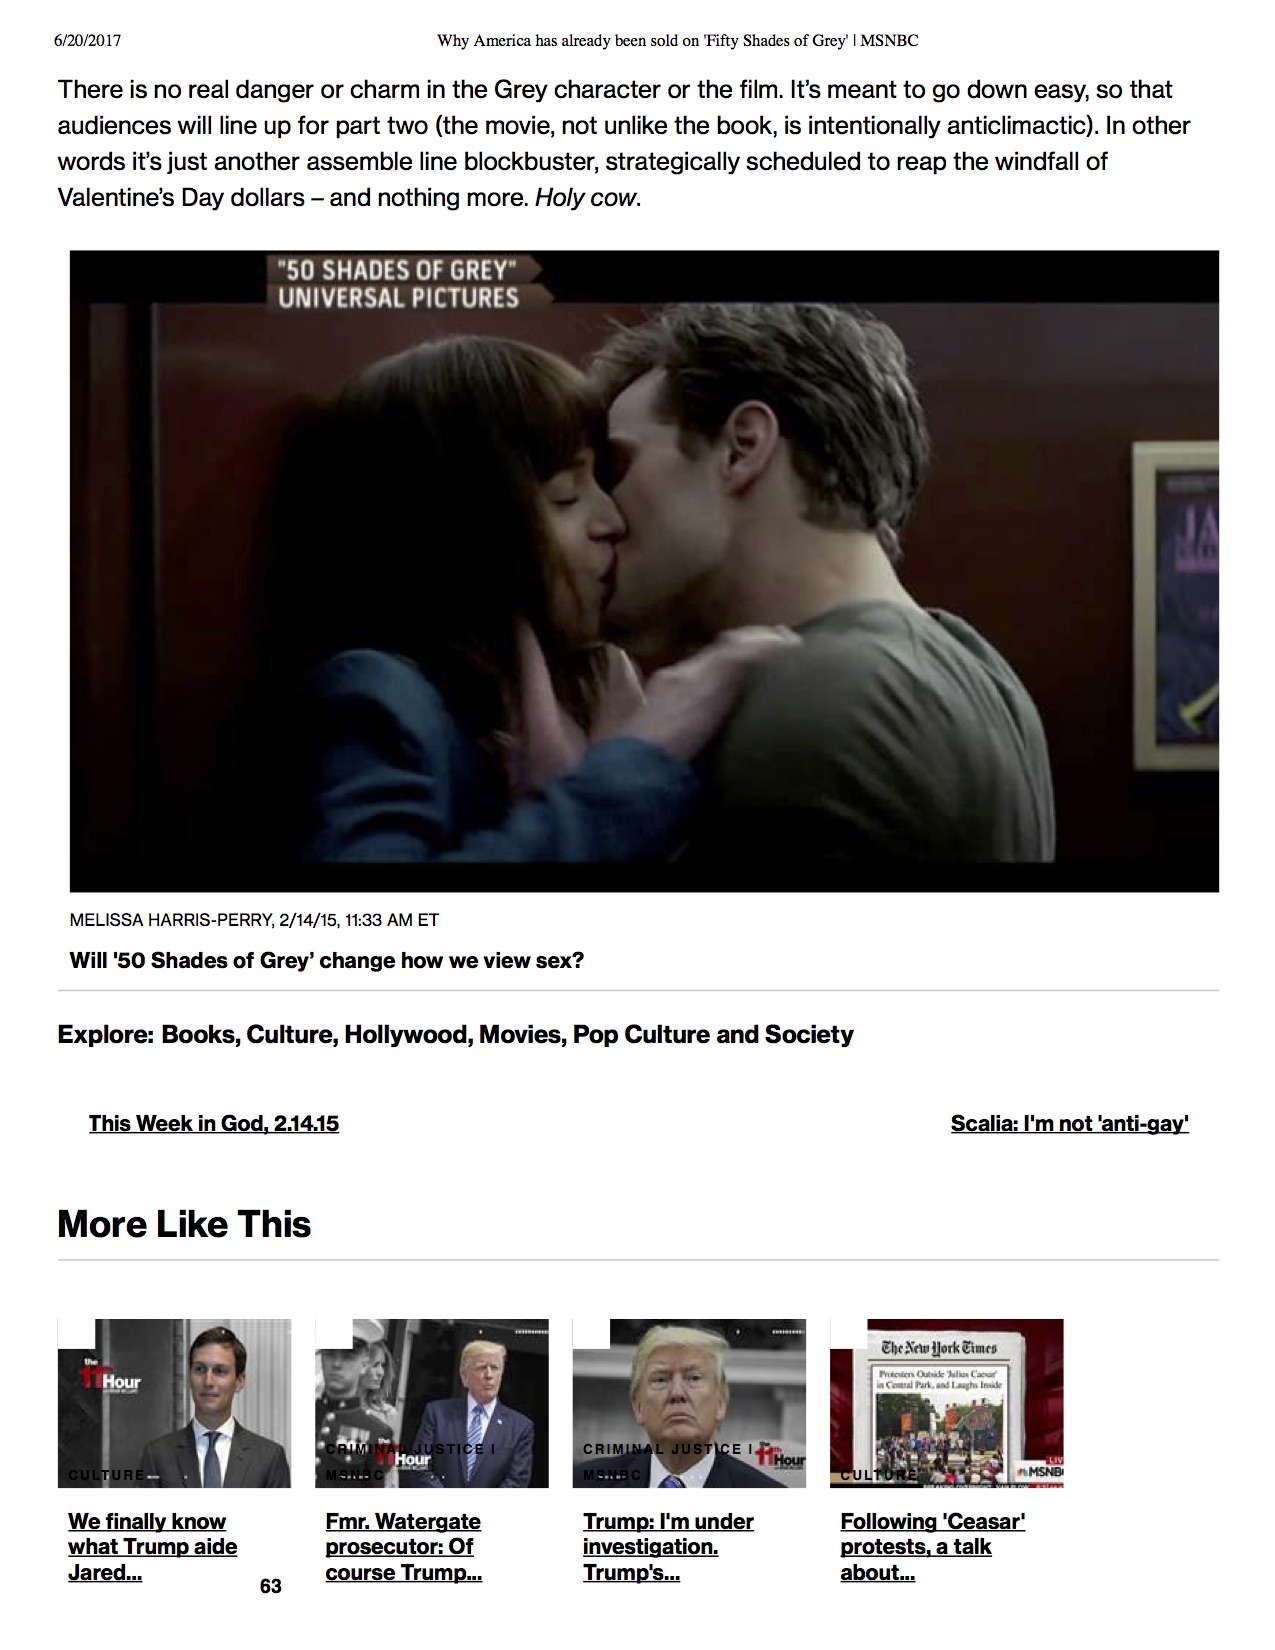 4Why America has already been sold on 'Fifty Shades of Grey' _ MSNBC.jpg